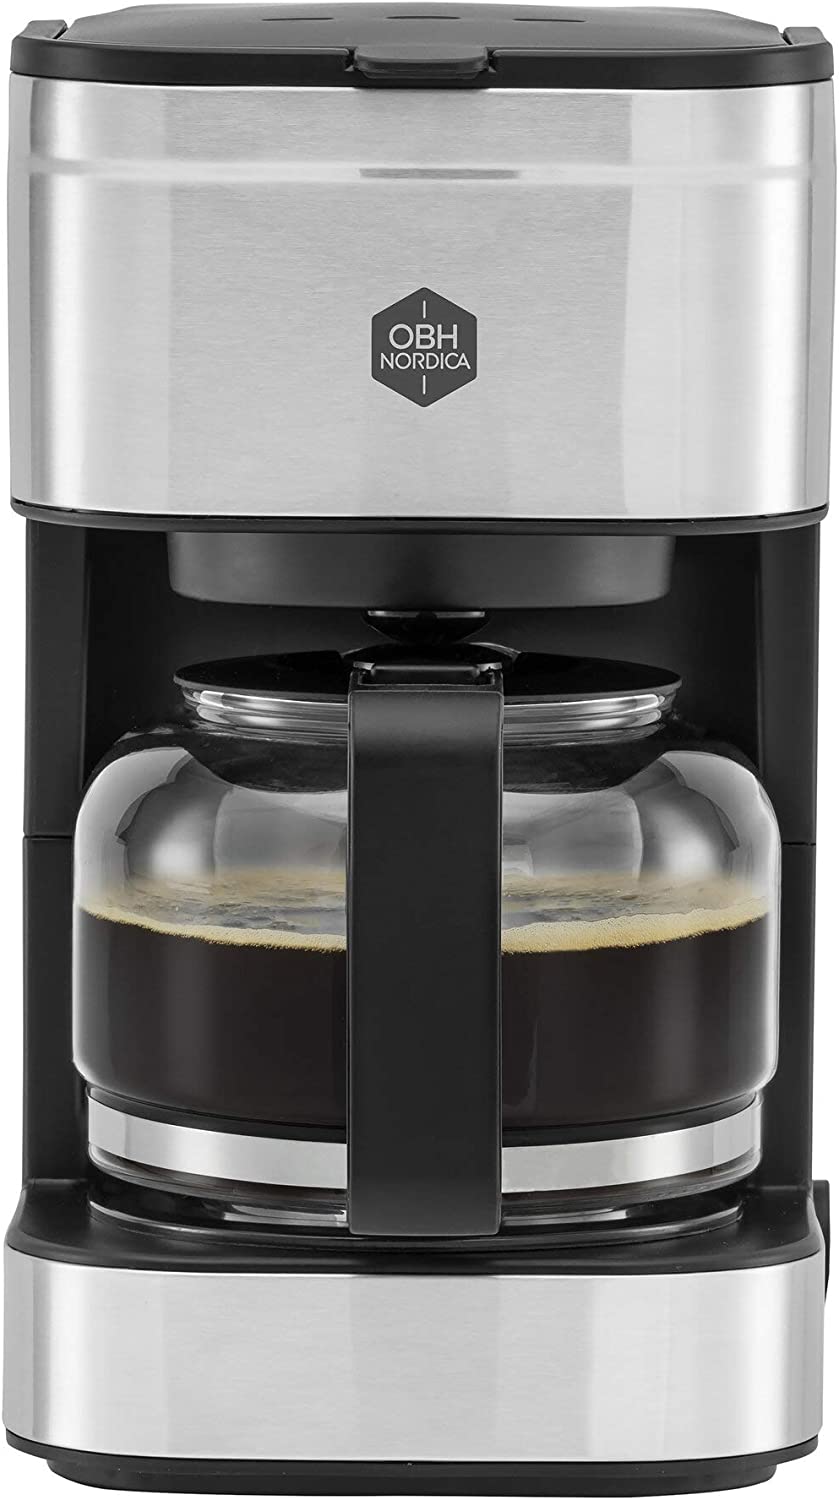 OBH NORDICA 2349 Coffee Prio Coffee Machine Stainless Steel 0.75 Litres 6 Copper Drip Stop Function Automatic Shut-Off 700 W